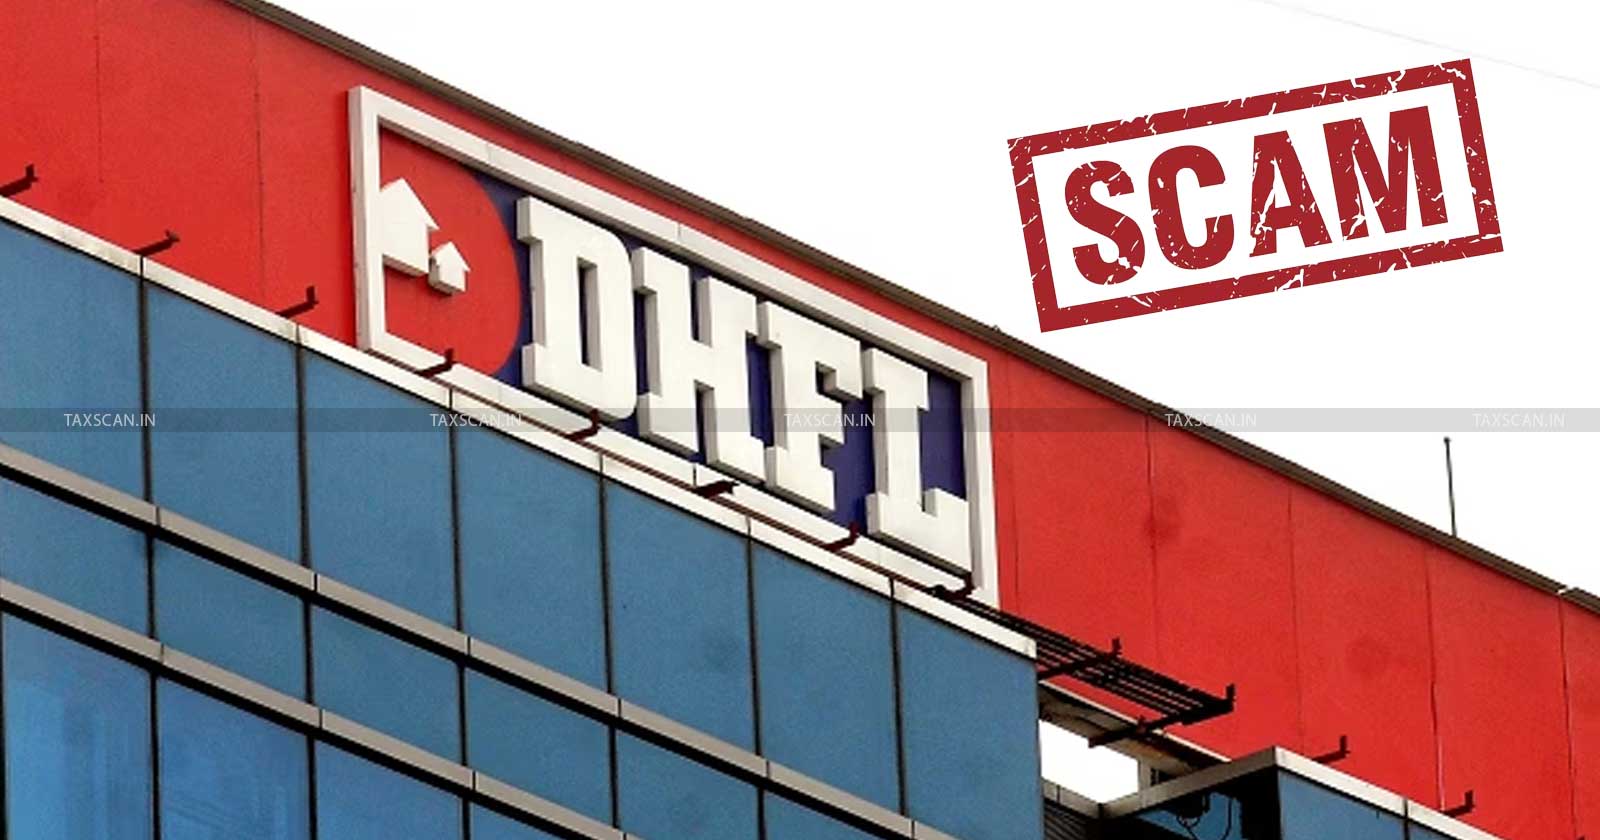 DHFL Scam - NFRA - Chartered Accountants - Auditors for Misconduct - Penalty - taxscan